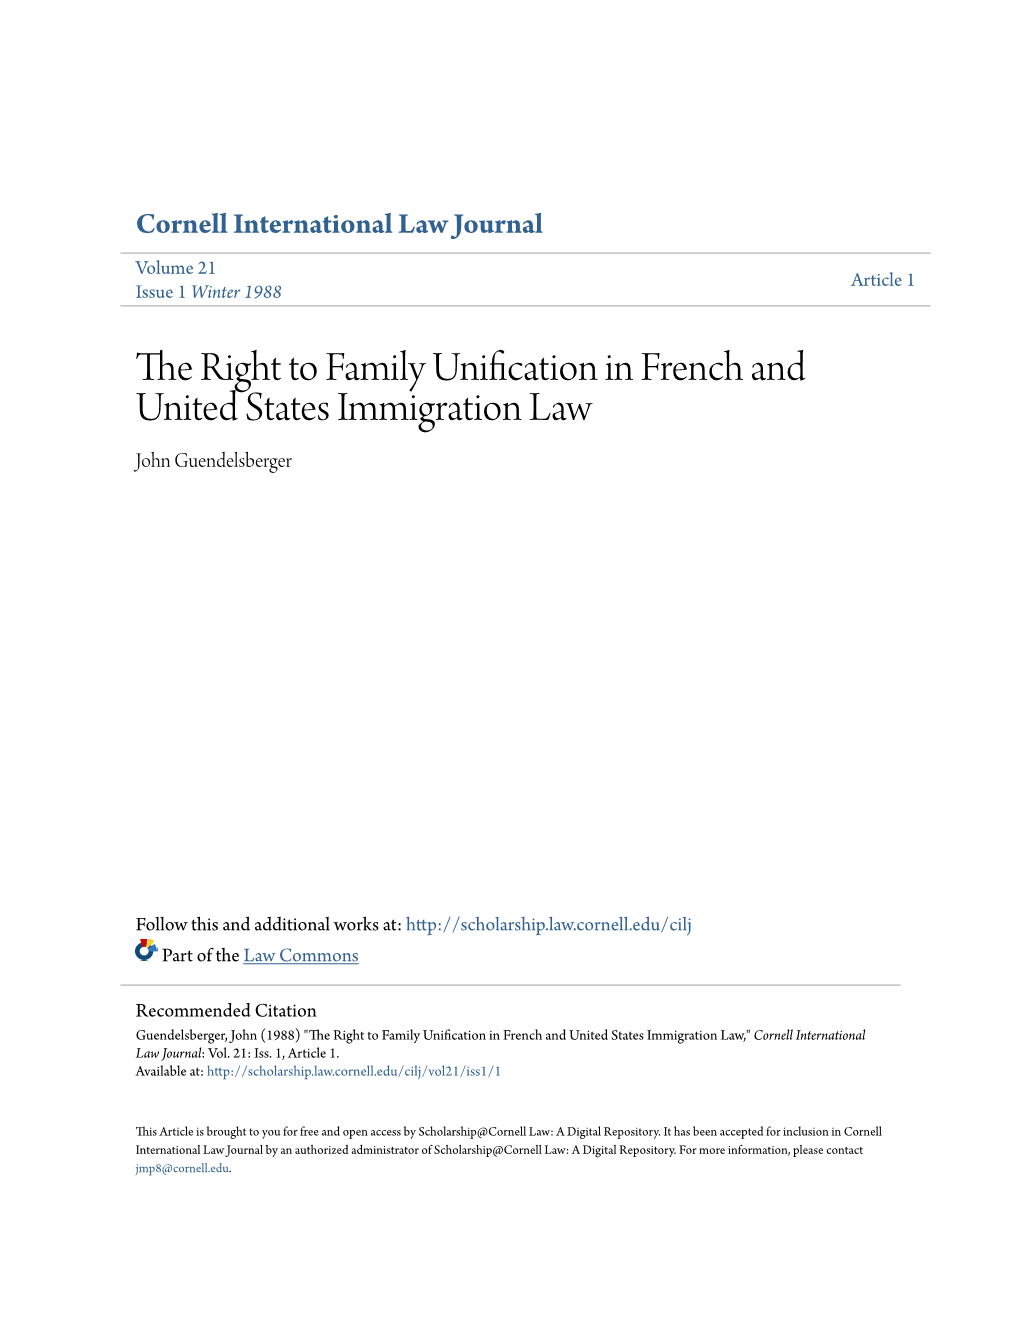 The Right to Family Unification in French and United States Immigration Law John Guendelsberger